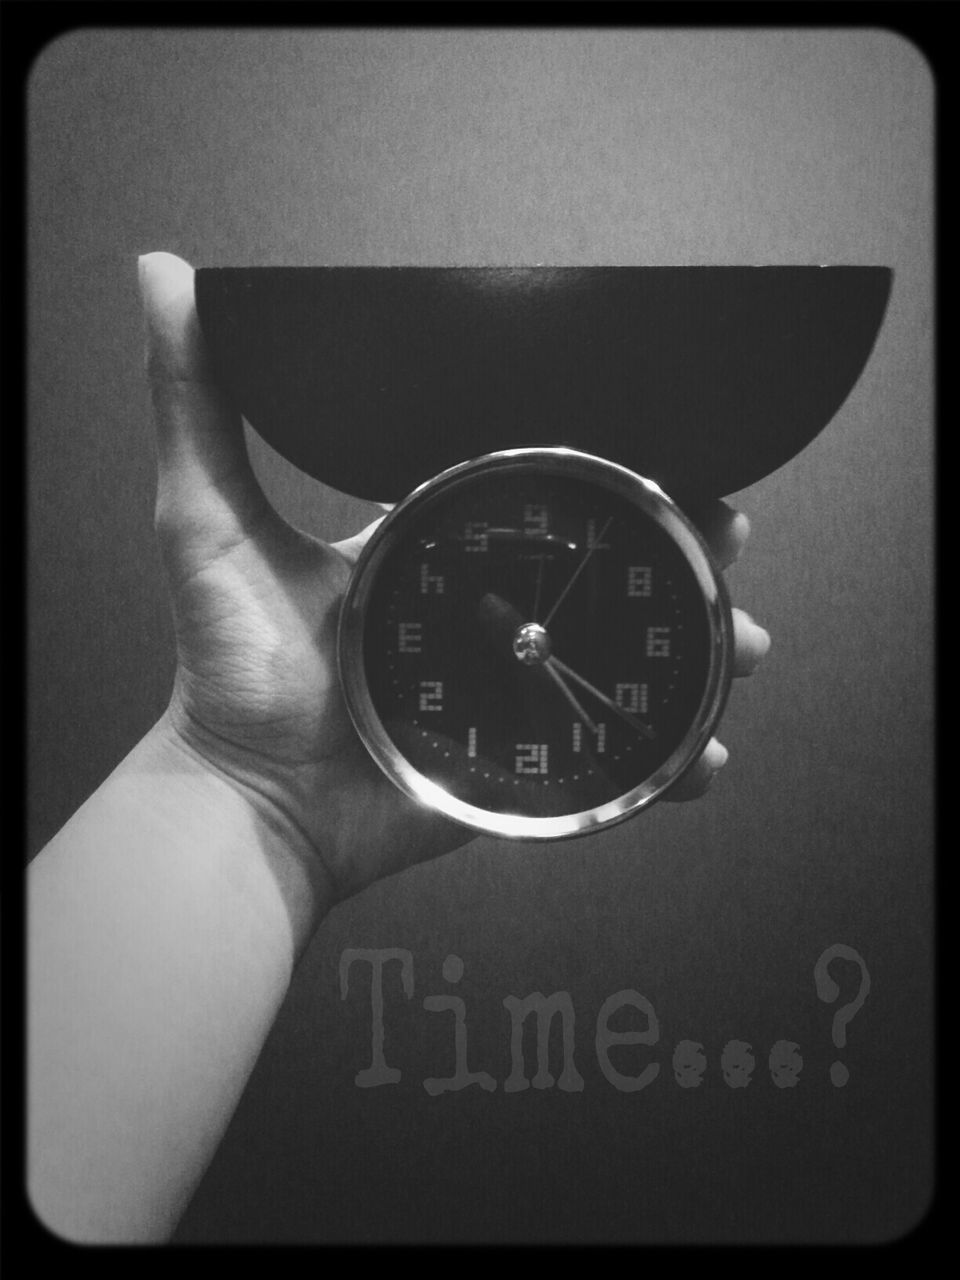 transfer print, communication, text, indoors, close-up, auto post production filter, number, western script, technology, clock, time, person, old-fashioned, part of, holding, accuracy, single object, retro styled, one person, photography themes